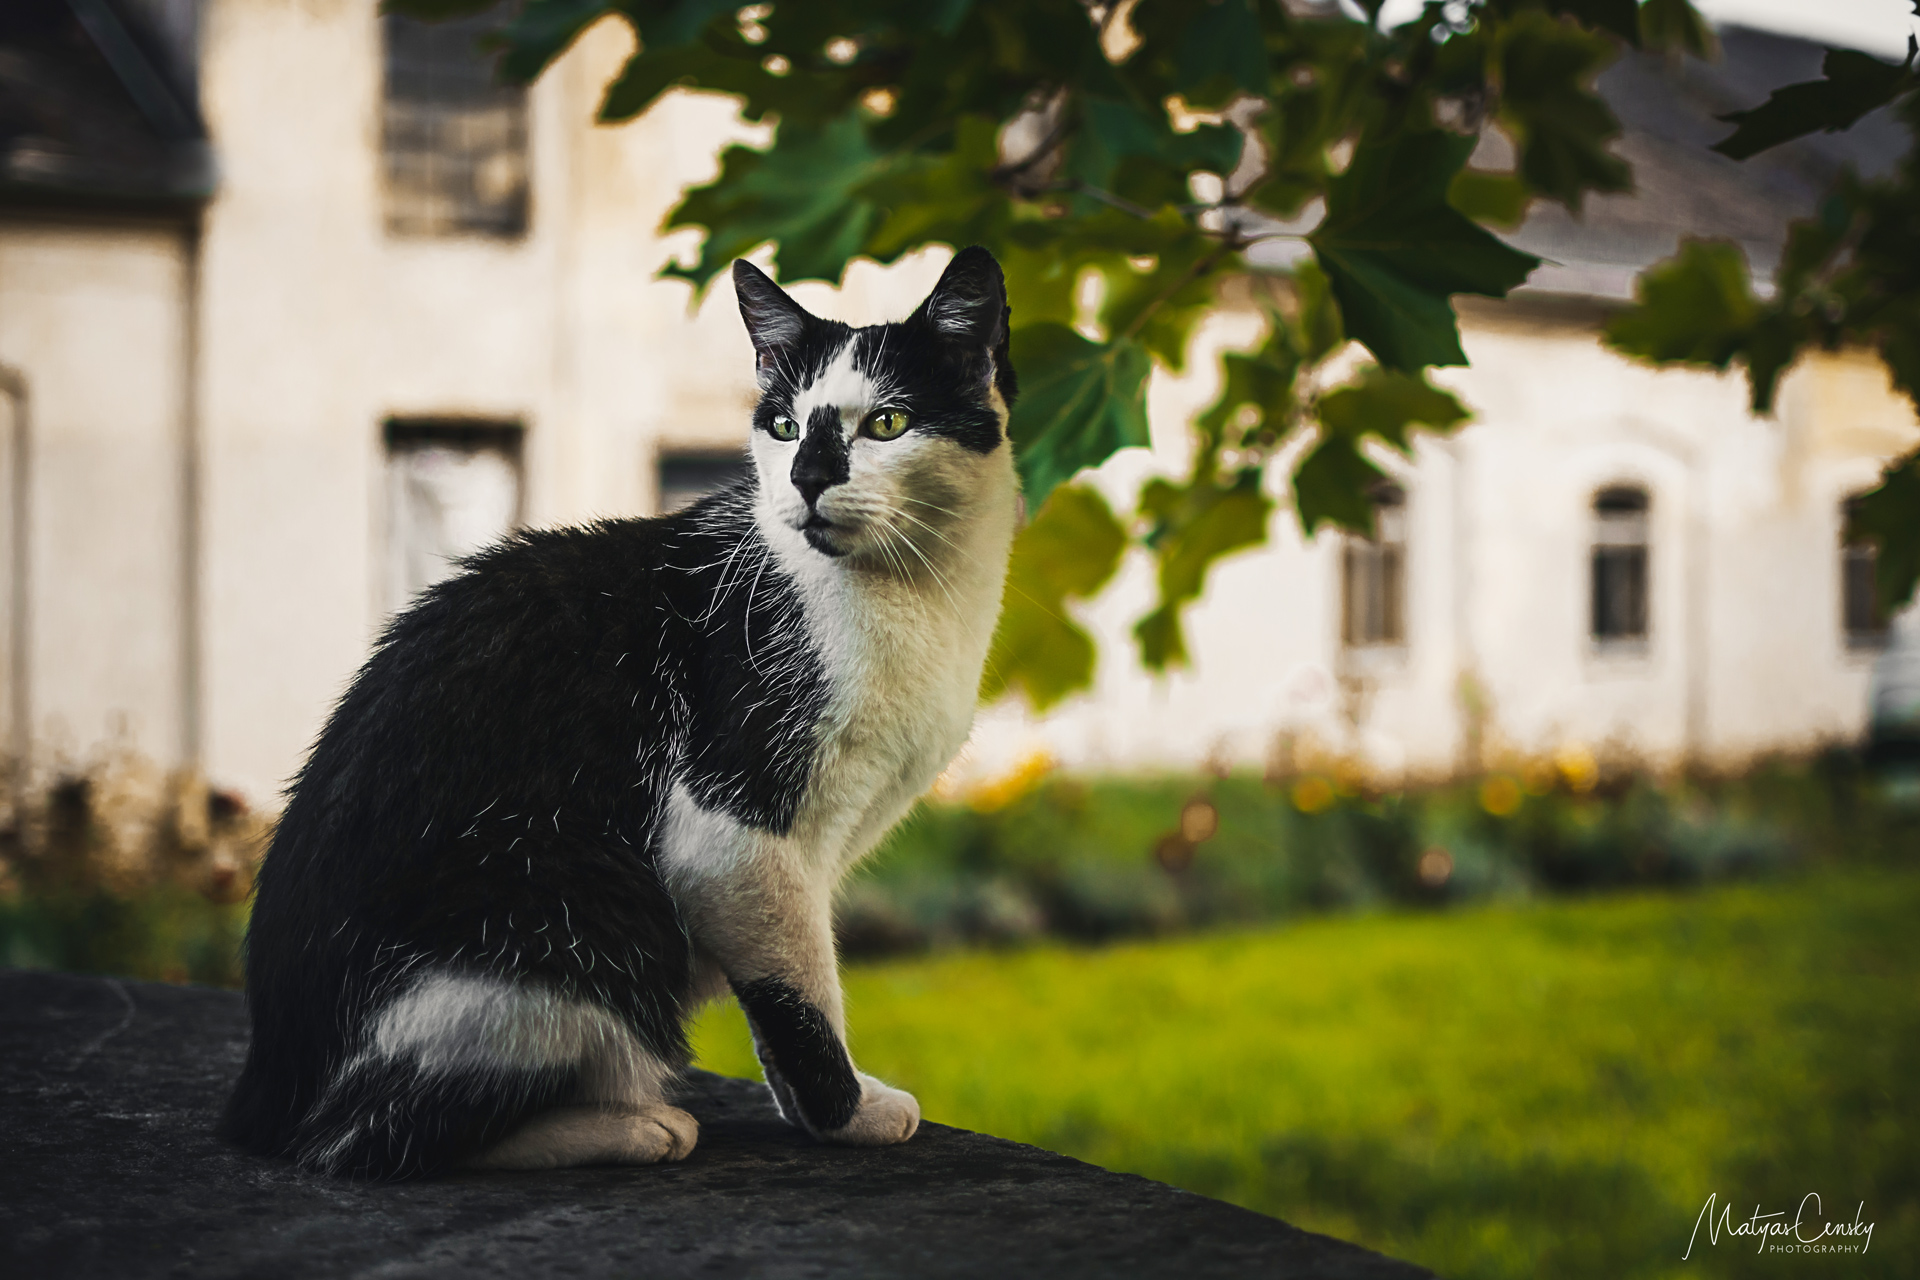 Photo of a black and white cat sitting on a stone table, under a tree with an old brewery building in the background.